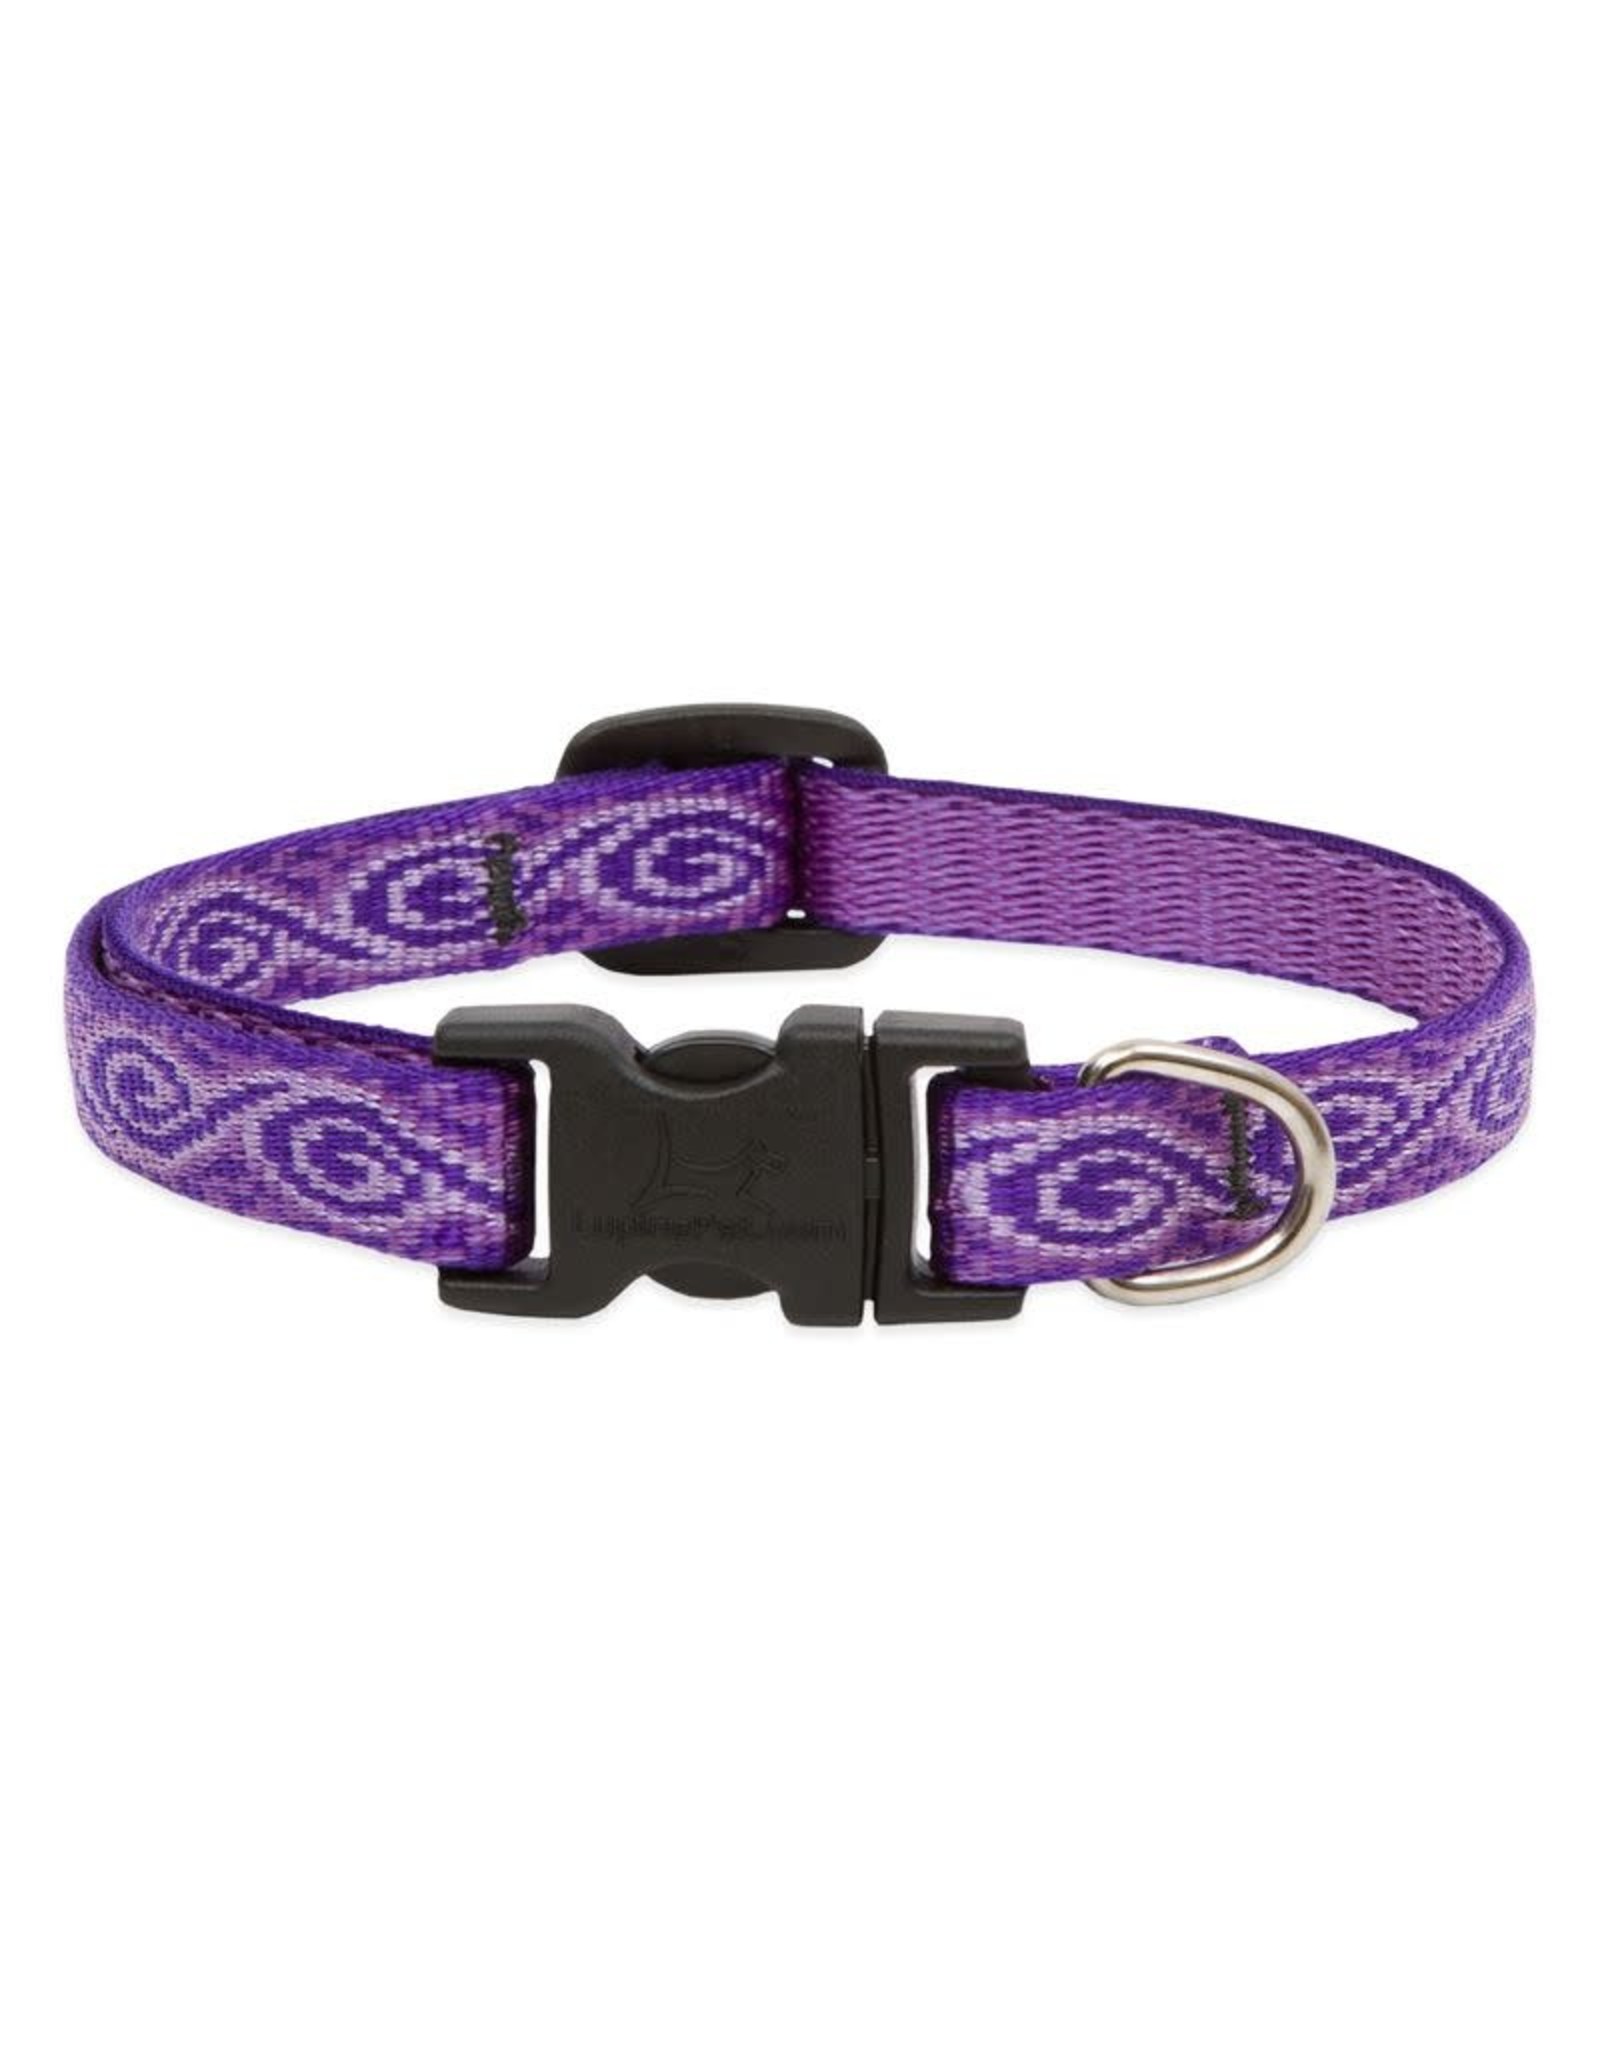 Lupine Lupine Jelly Roll Collar: 3/4 in wide, 9-14 inch